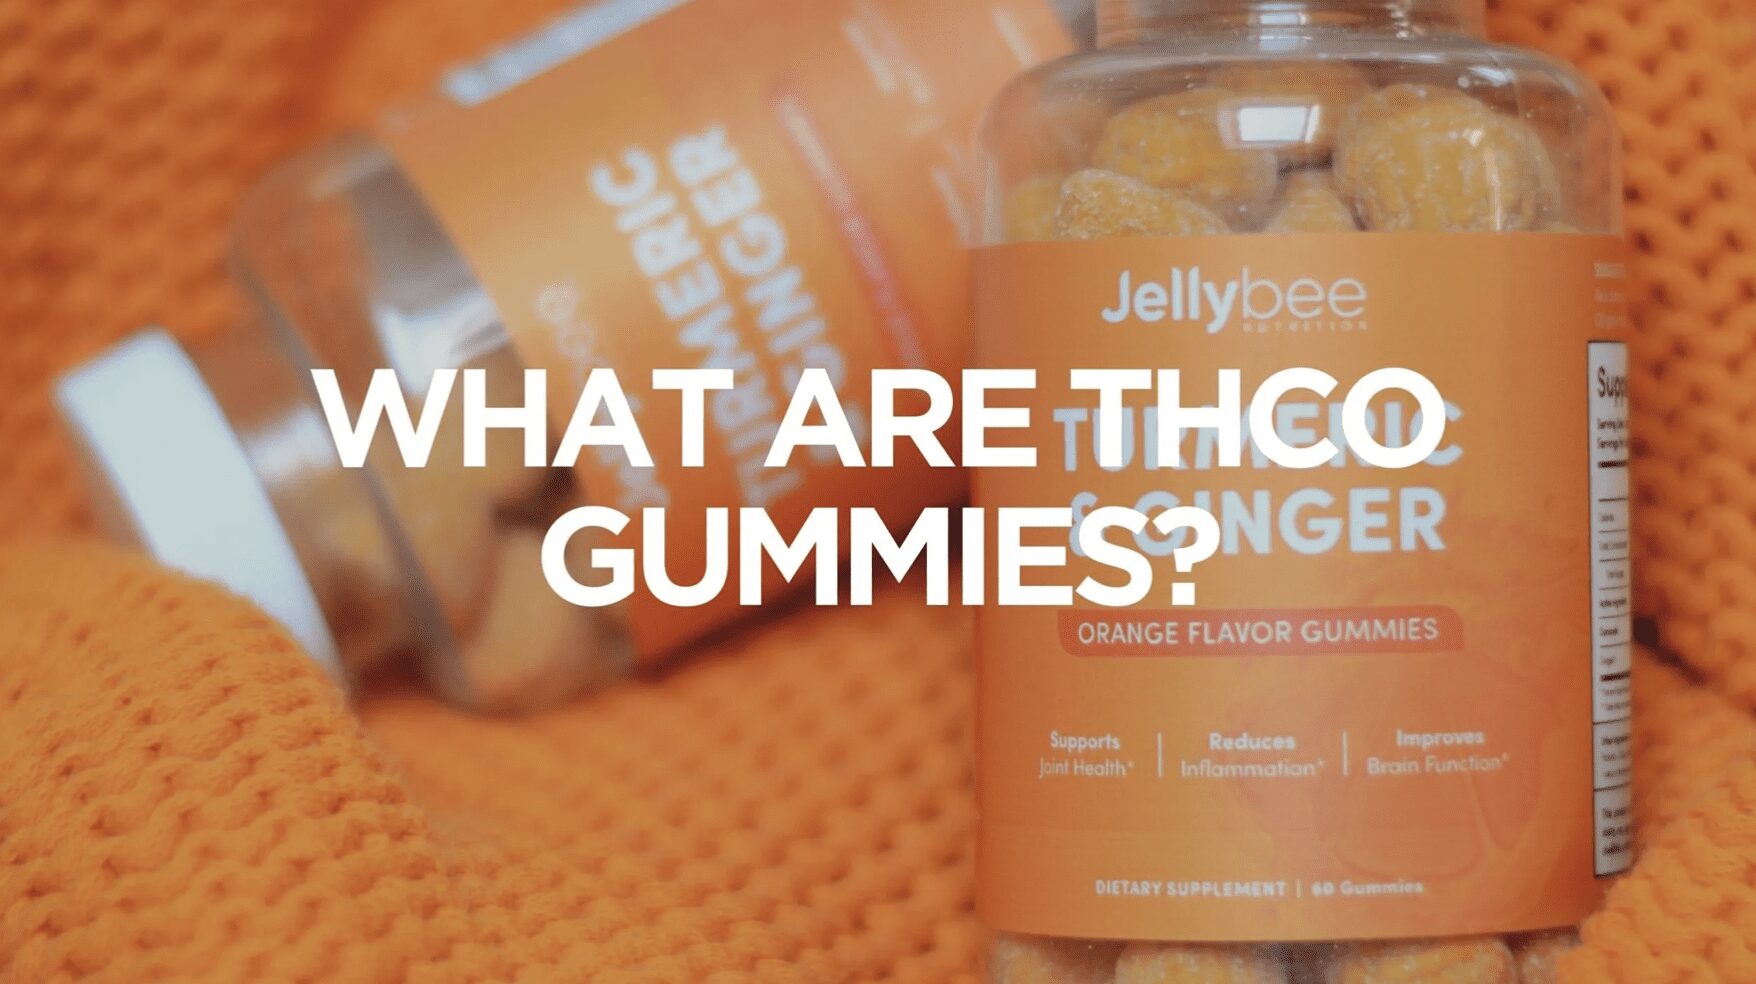 What are THCO gummies?